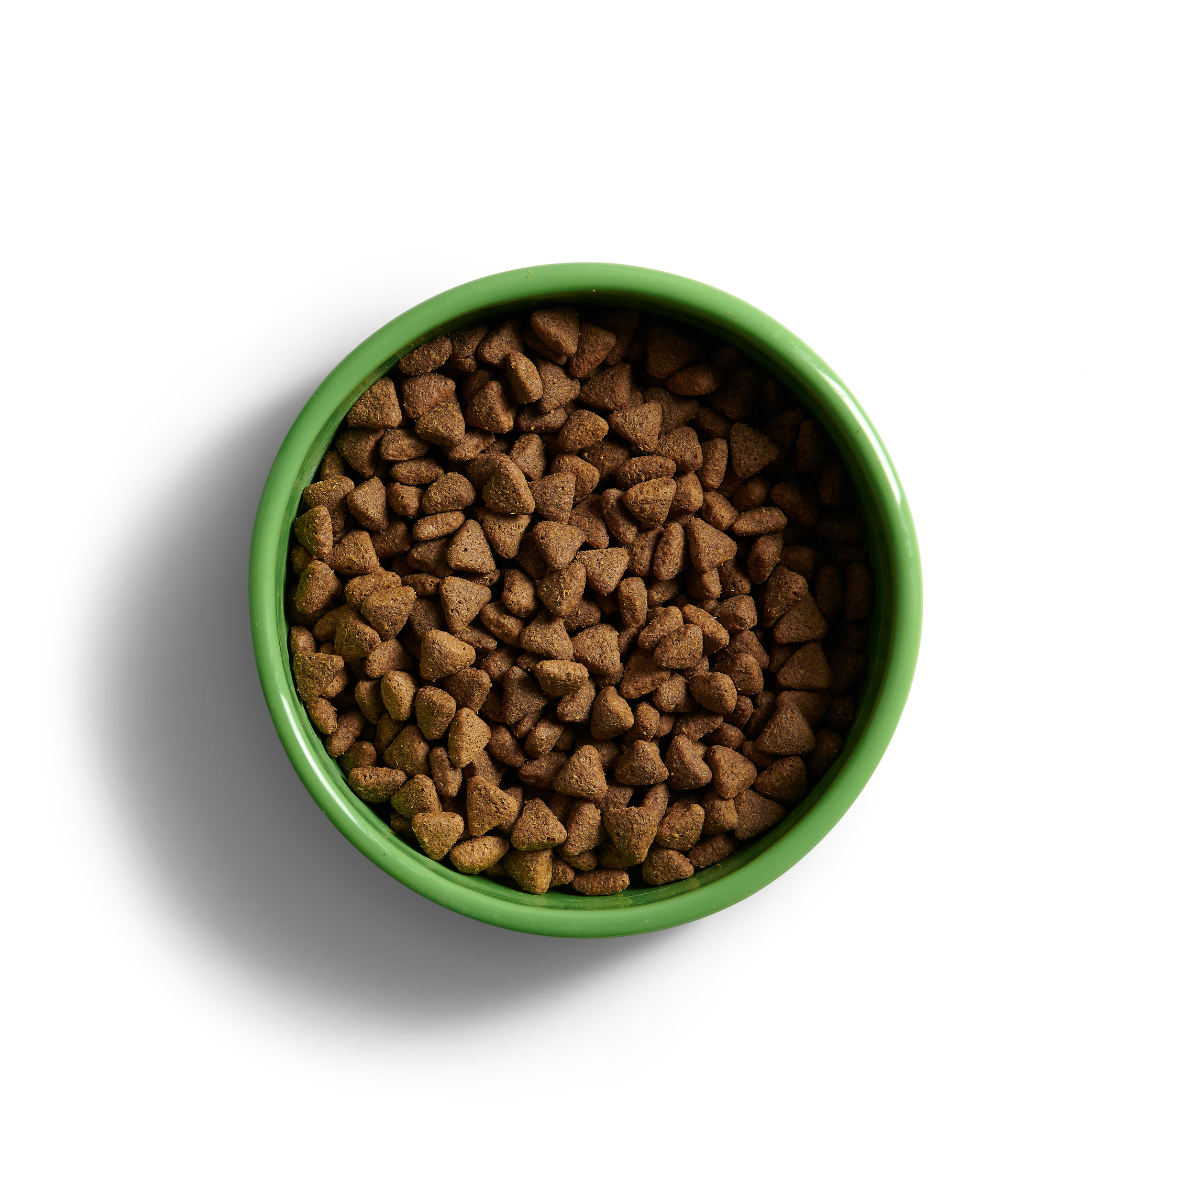 YORA insect ( insect ) super food for adult dogs of all breeds